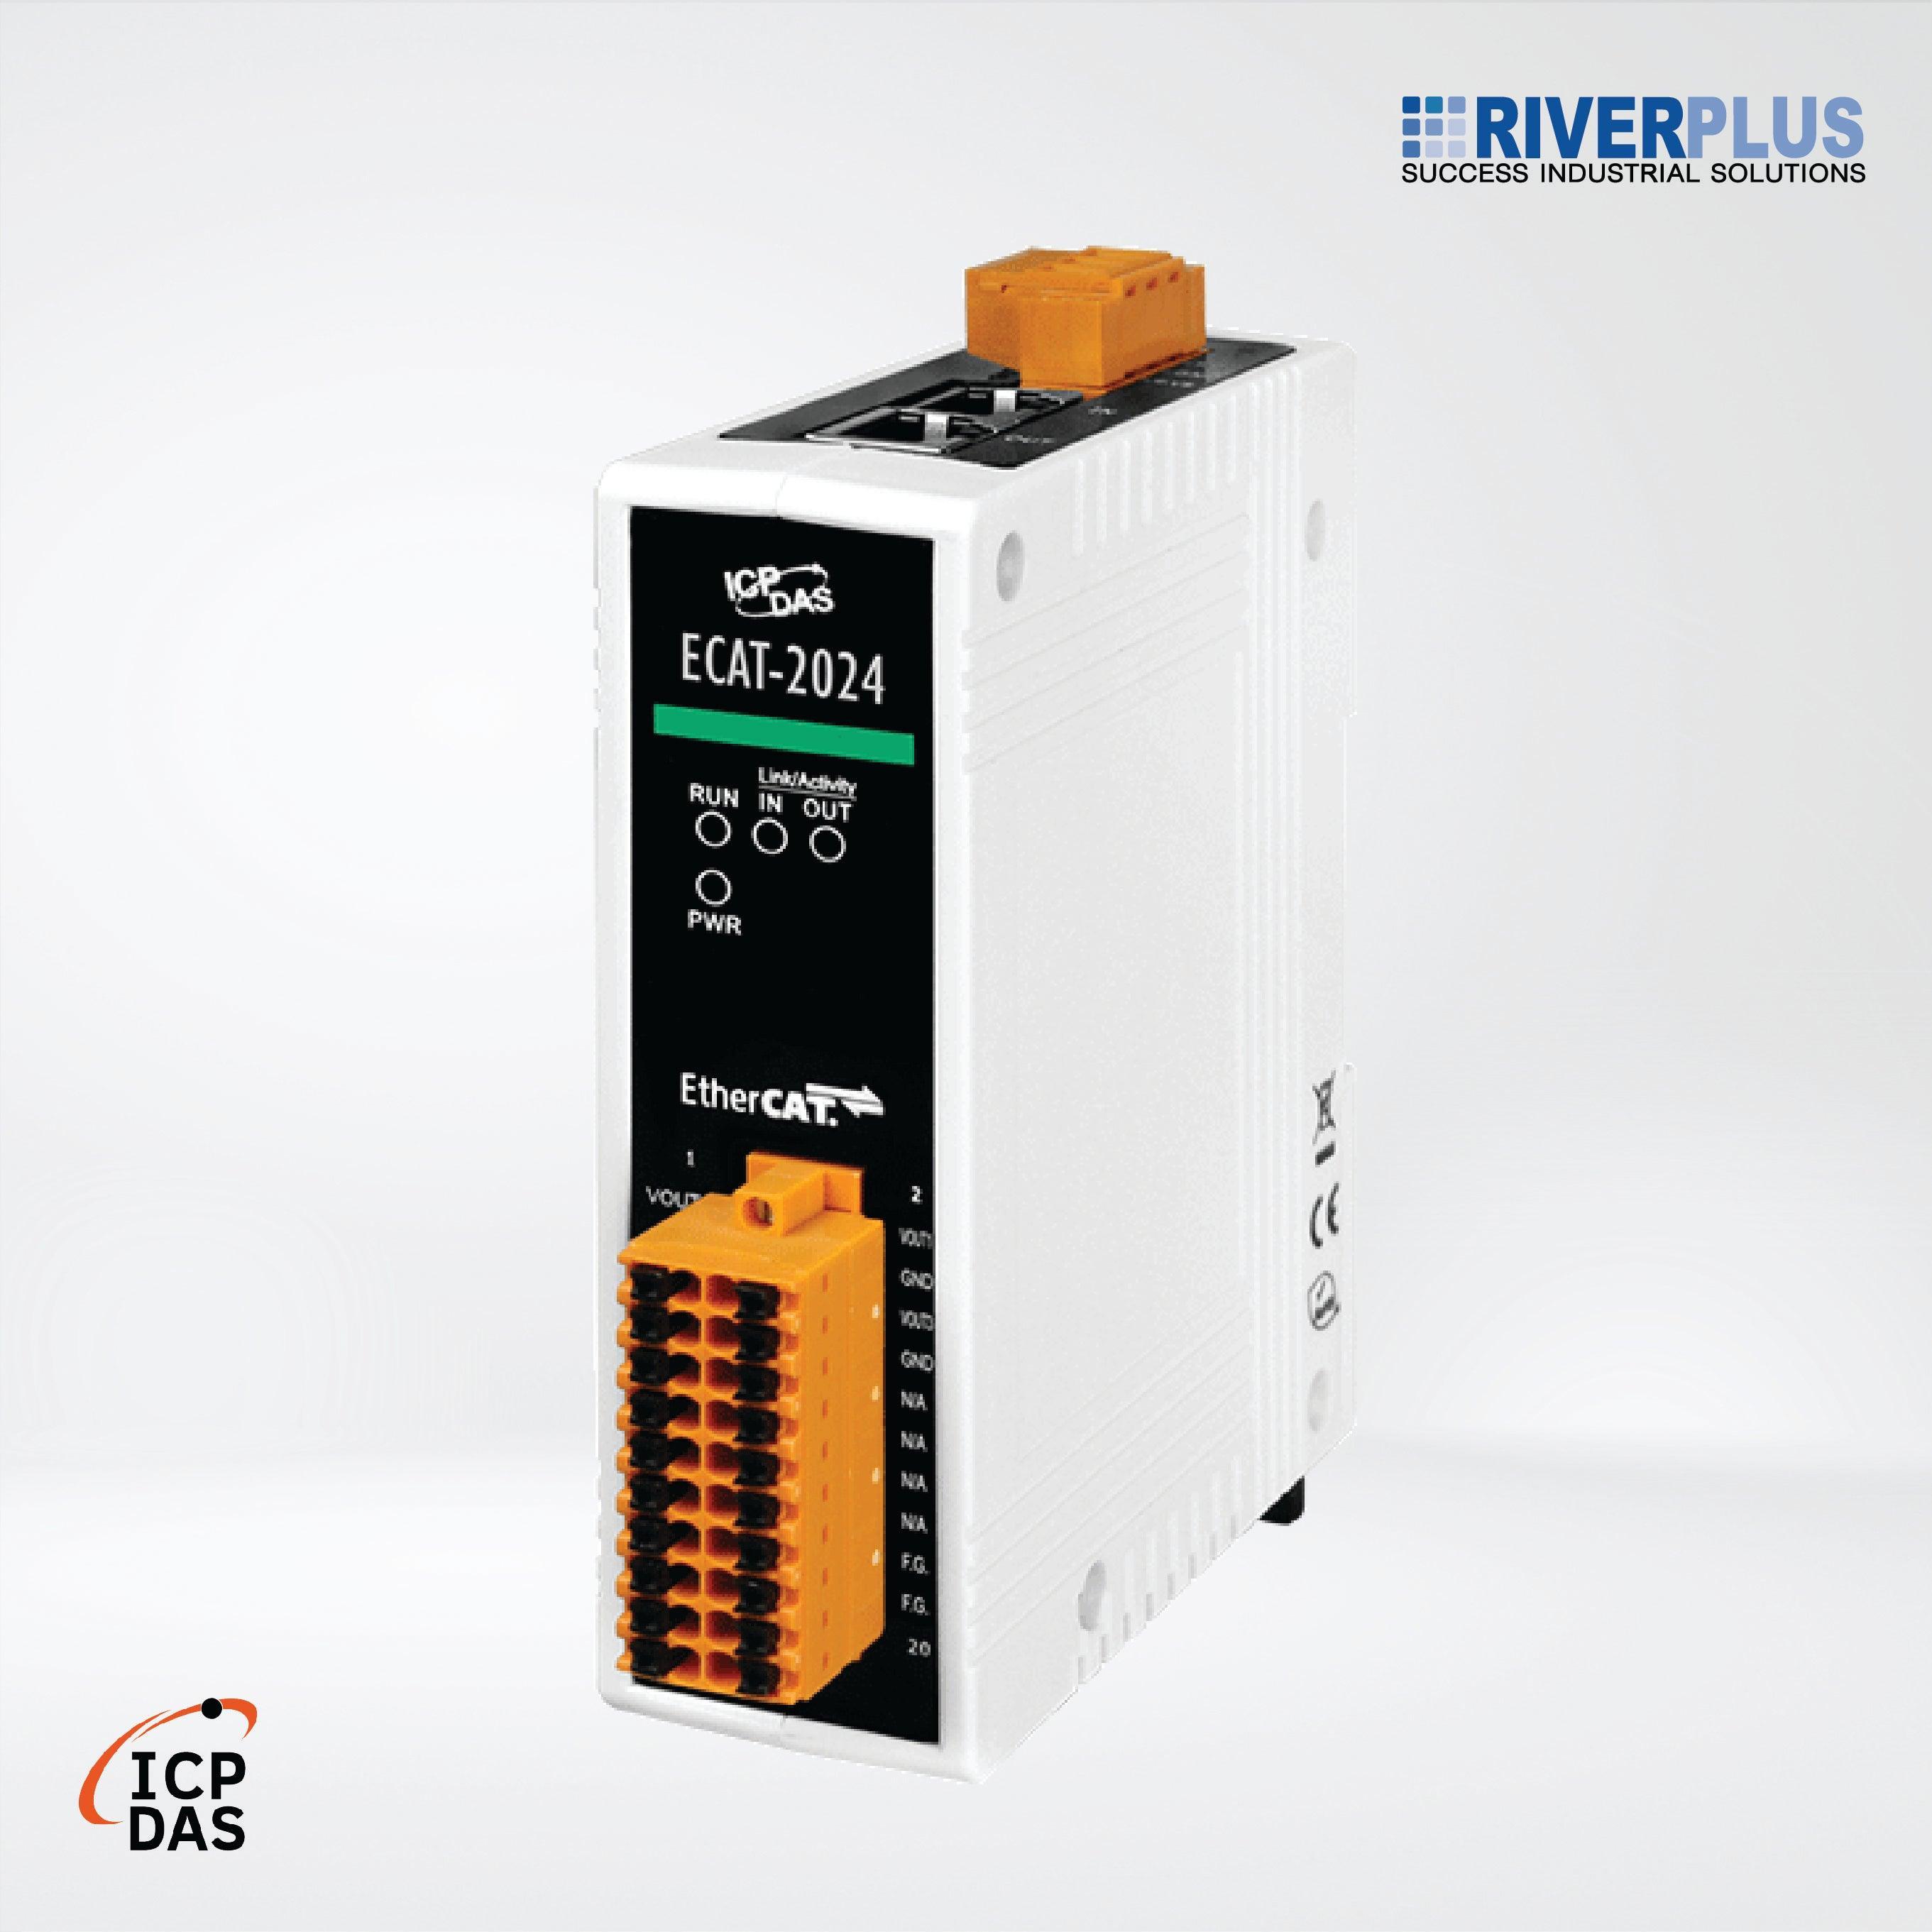 ECAT-2024 EtherCAT Slave I/O Module with Isolated 4-ch AO - Riverplus